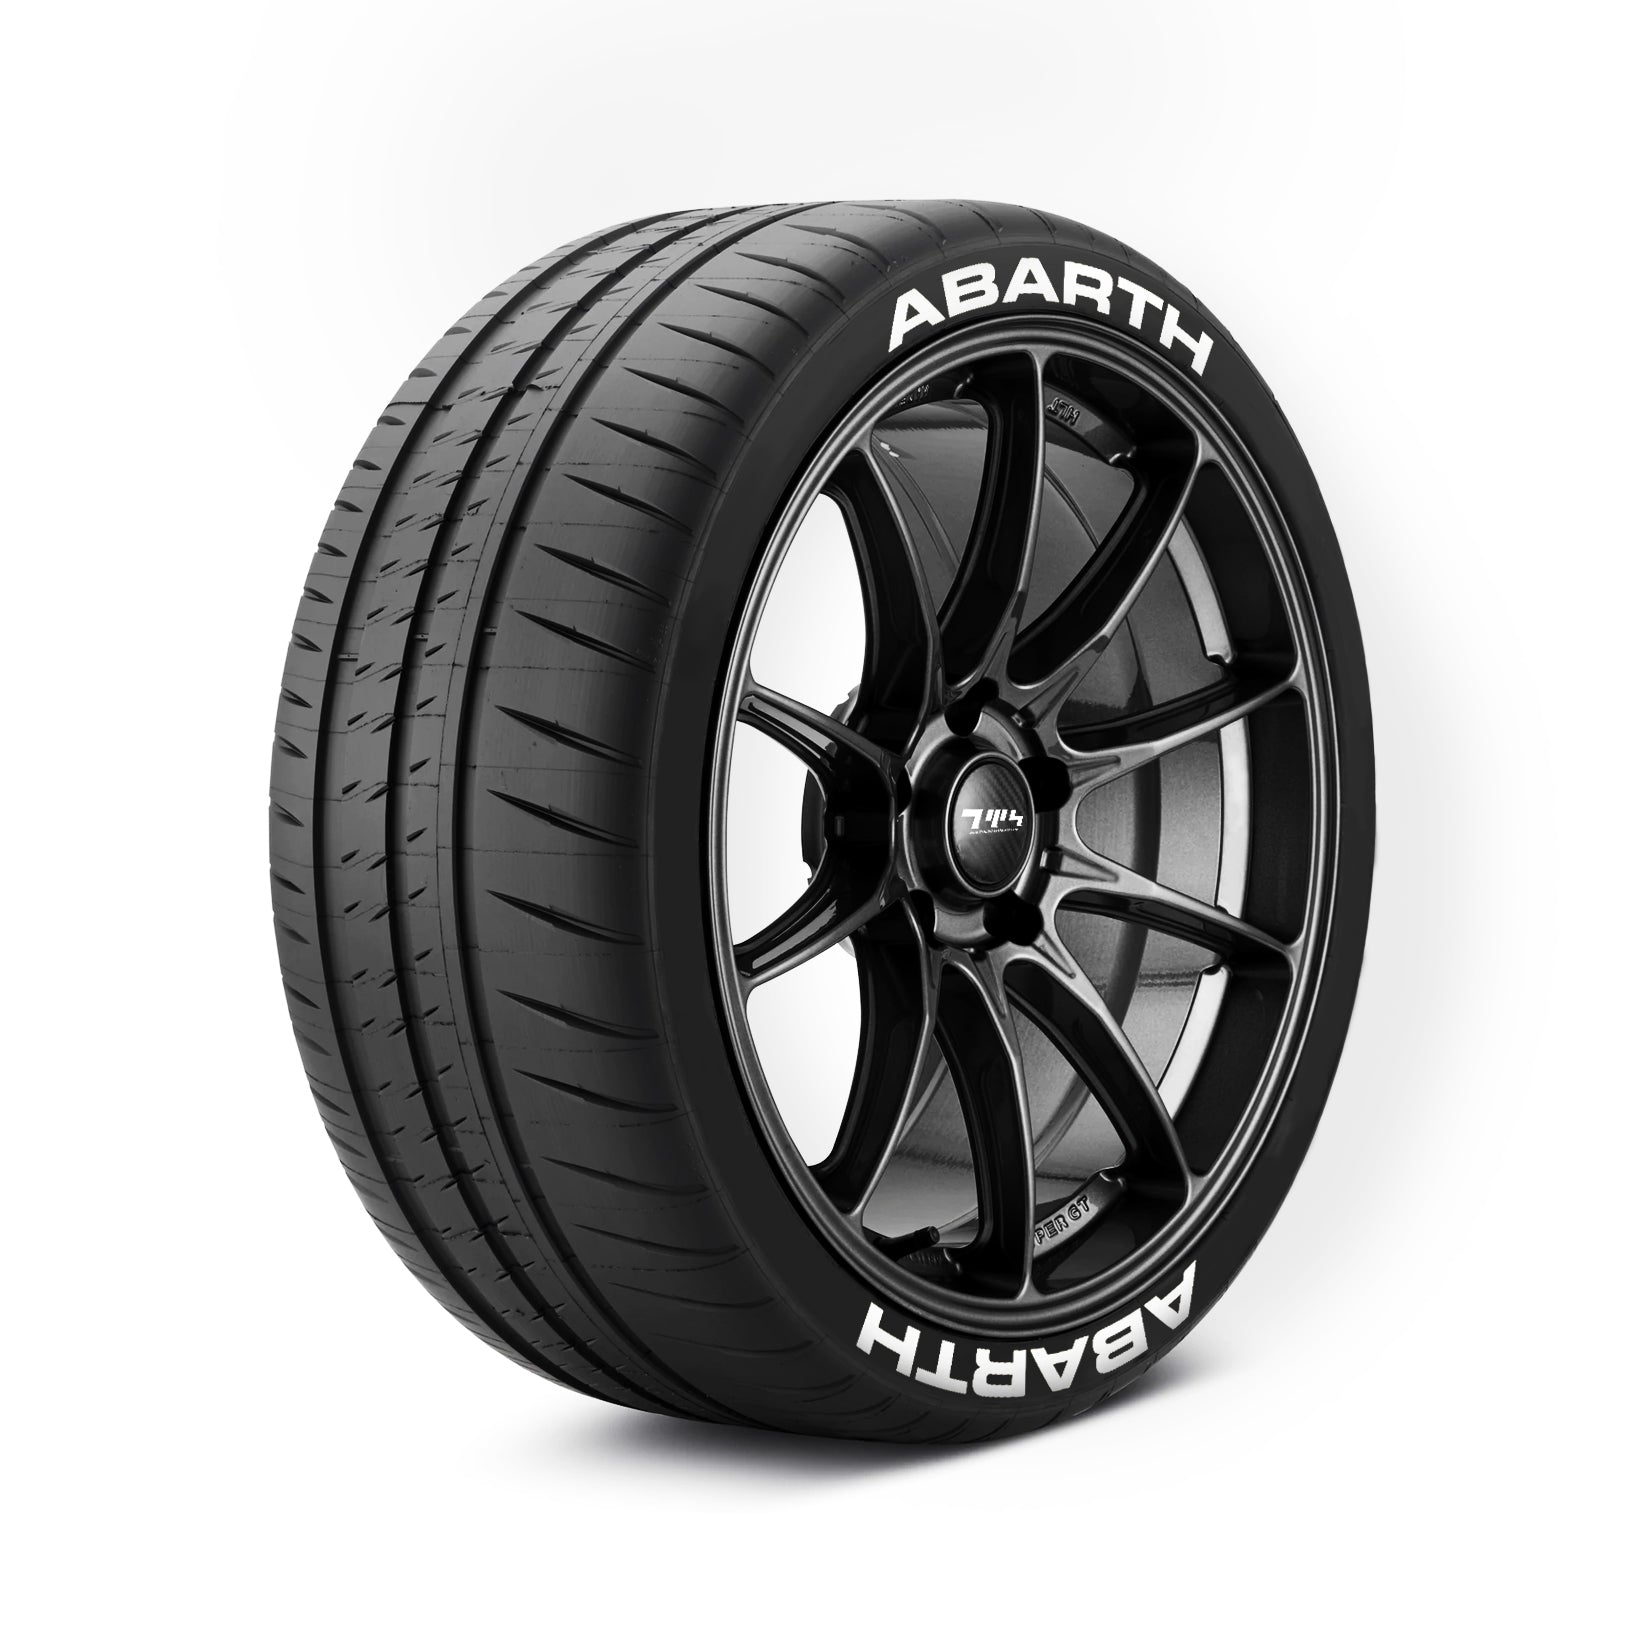 Abarth Tyre Stickers